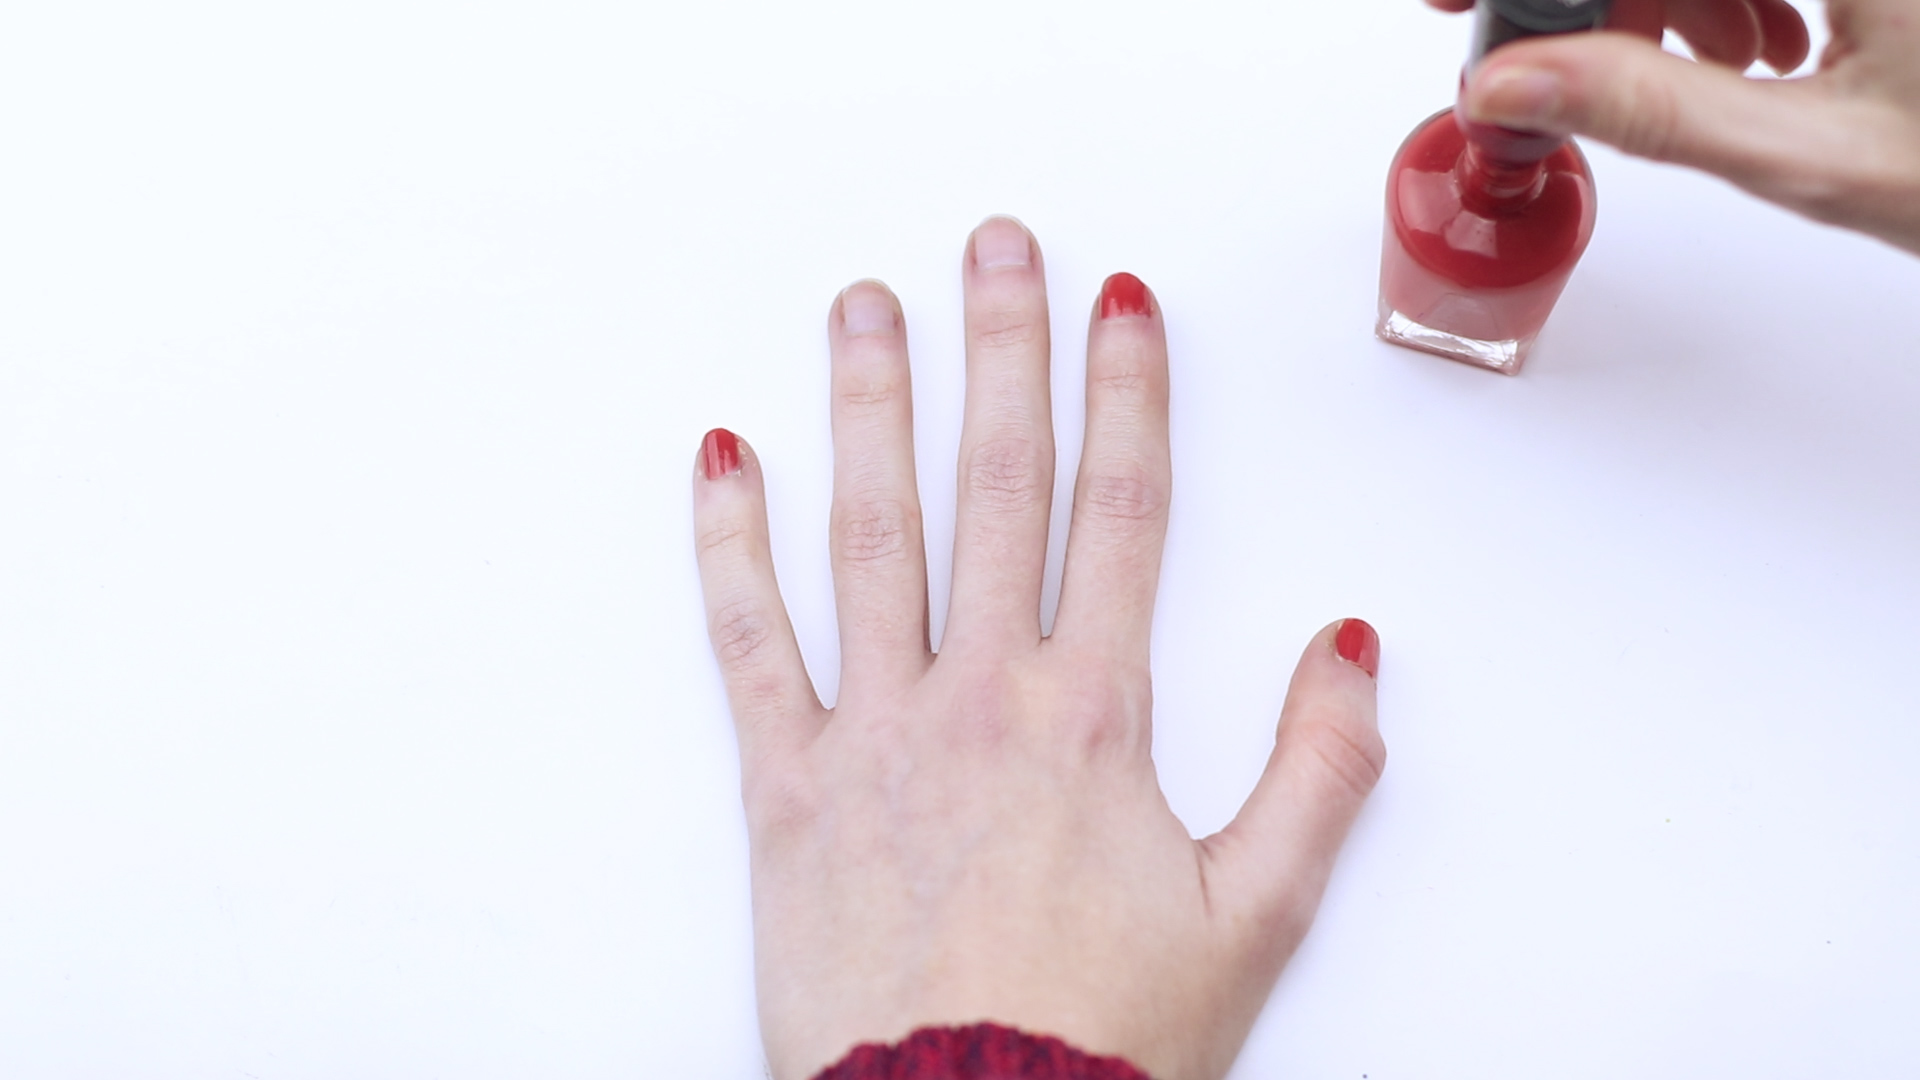 How to Dry Nail Polish Without Smudging - wide 4